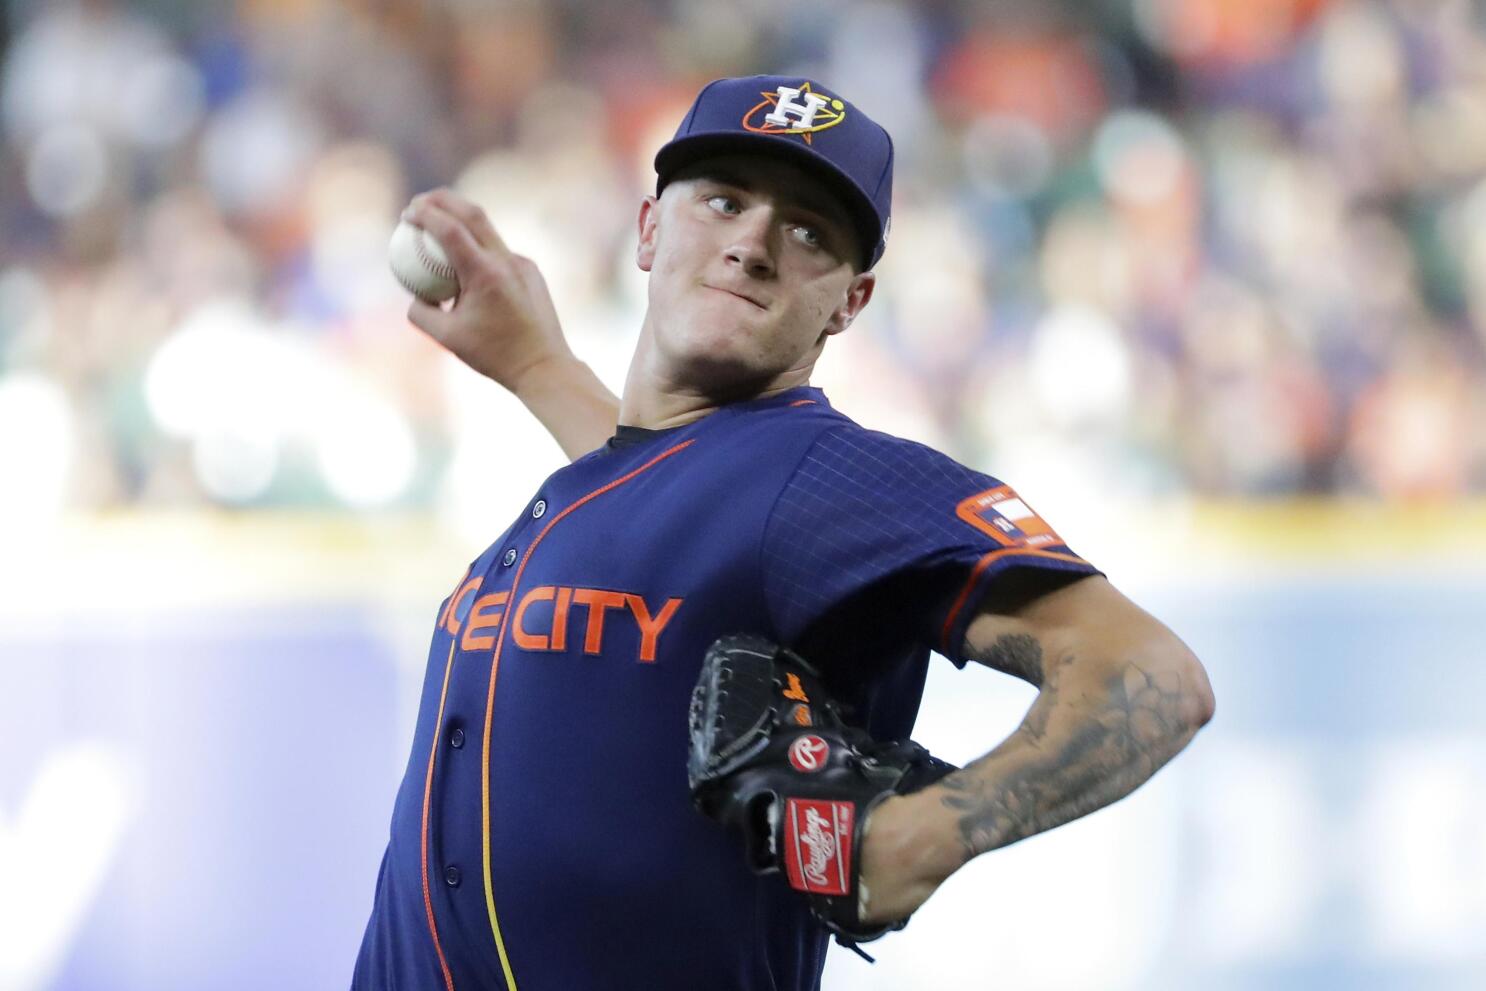 Hunter Brown Strikes Out 7 in 5 Innings!, Houston Astros